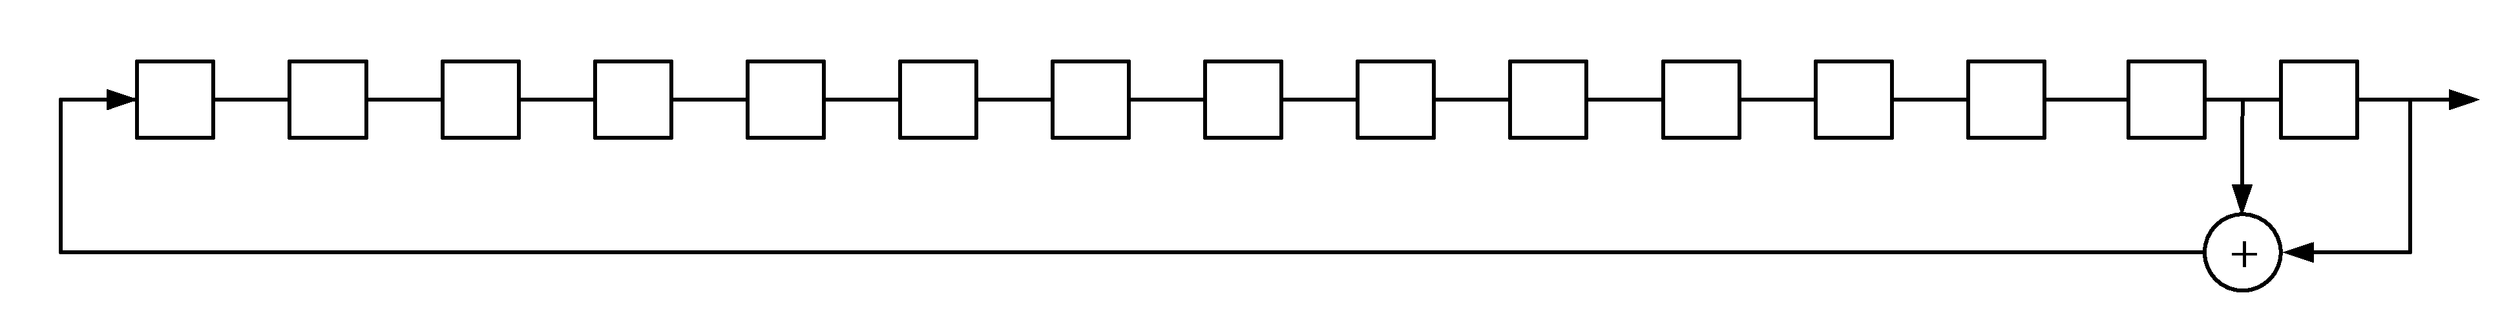 Linear feedback shift register for generation of the PRBS15 sequence